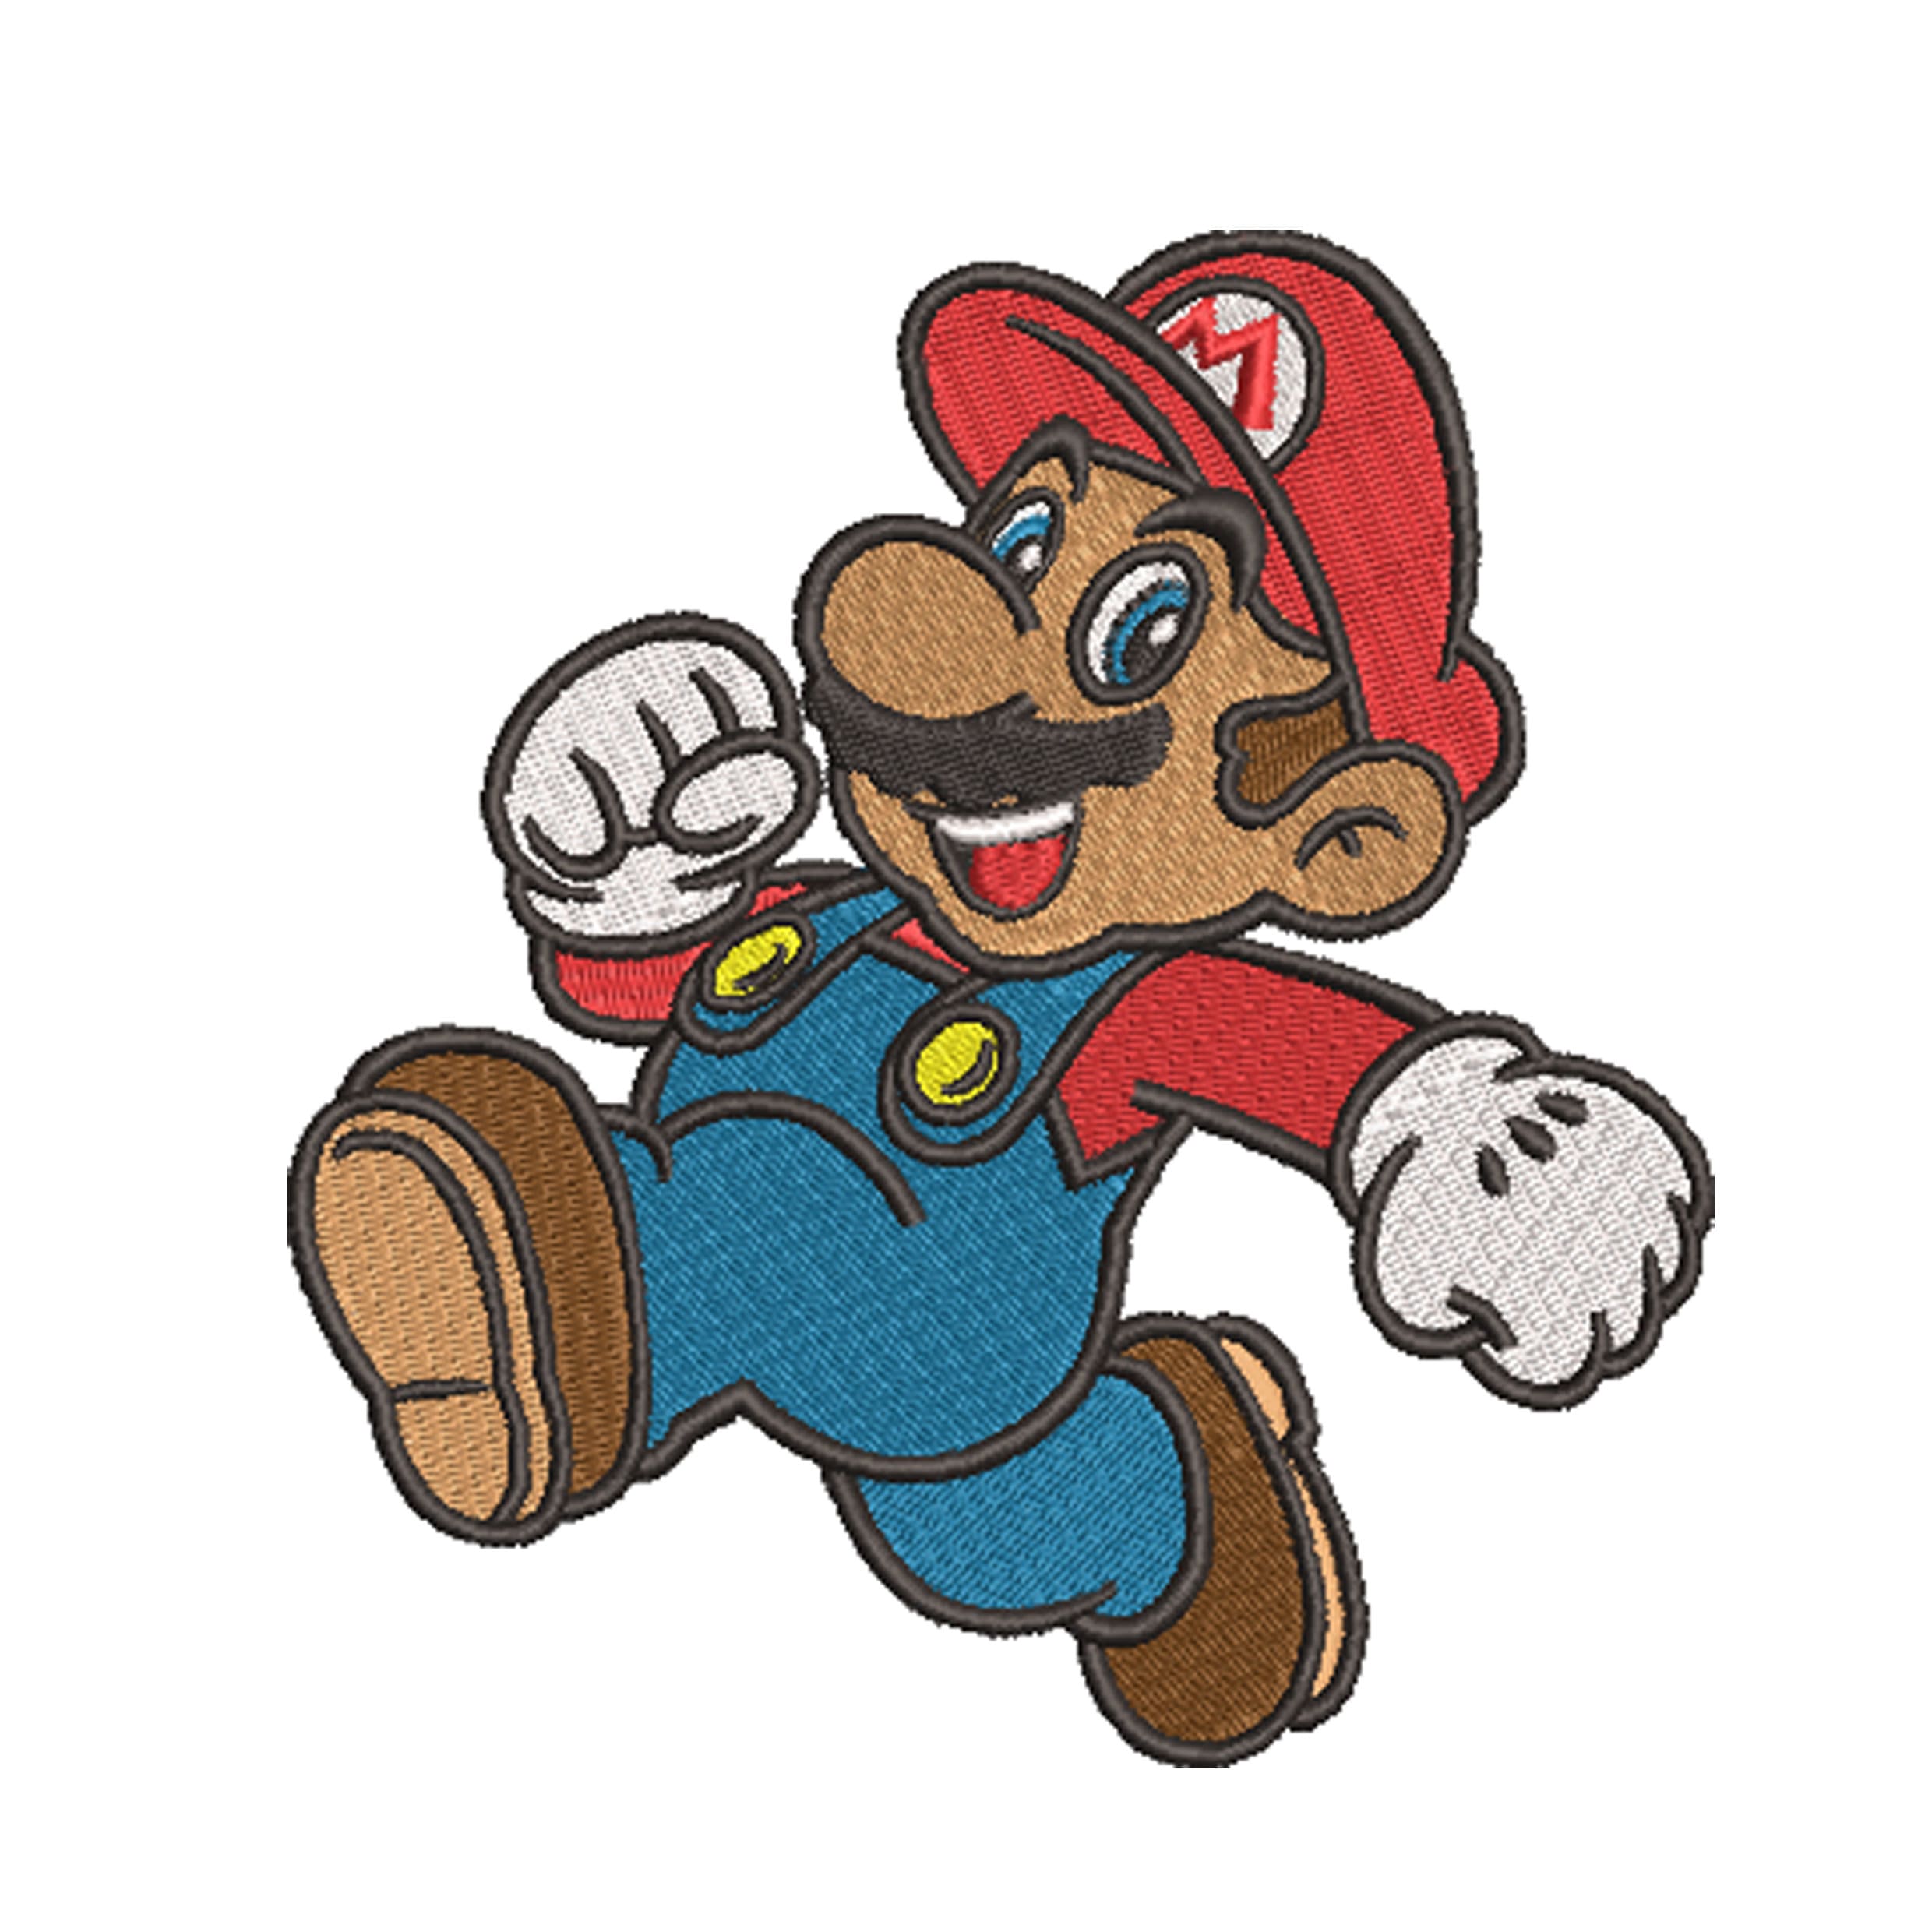 Paper Mario Iron-on Patches (Inspired by The Paper Mario Franchise)